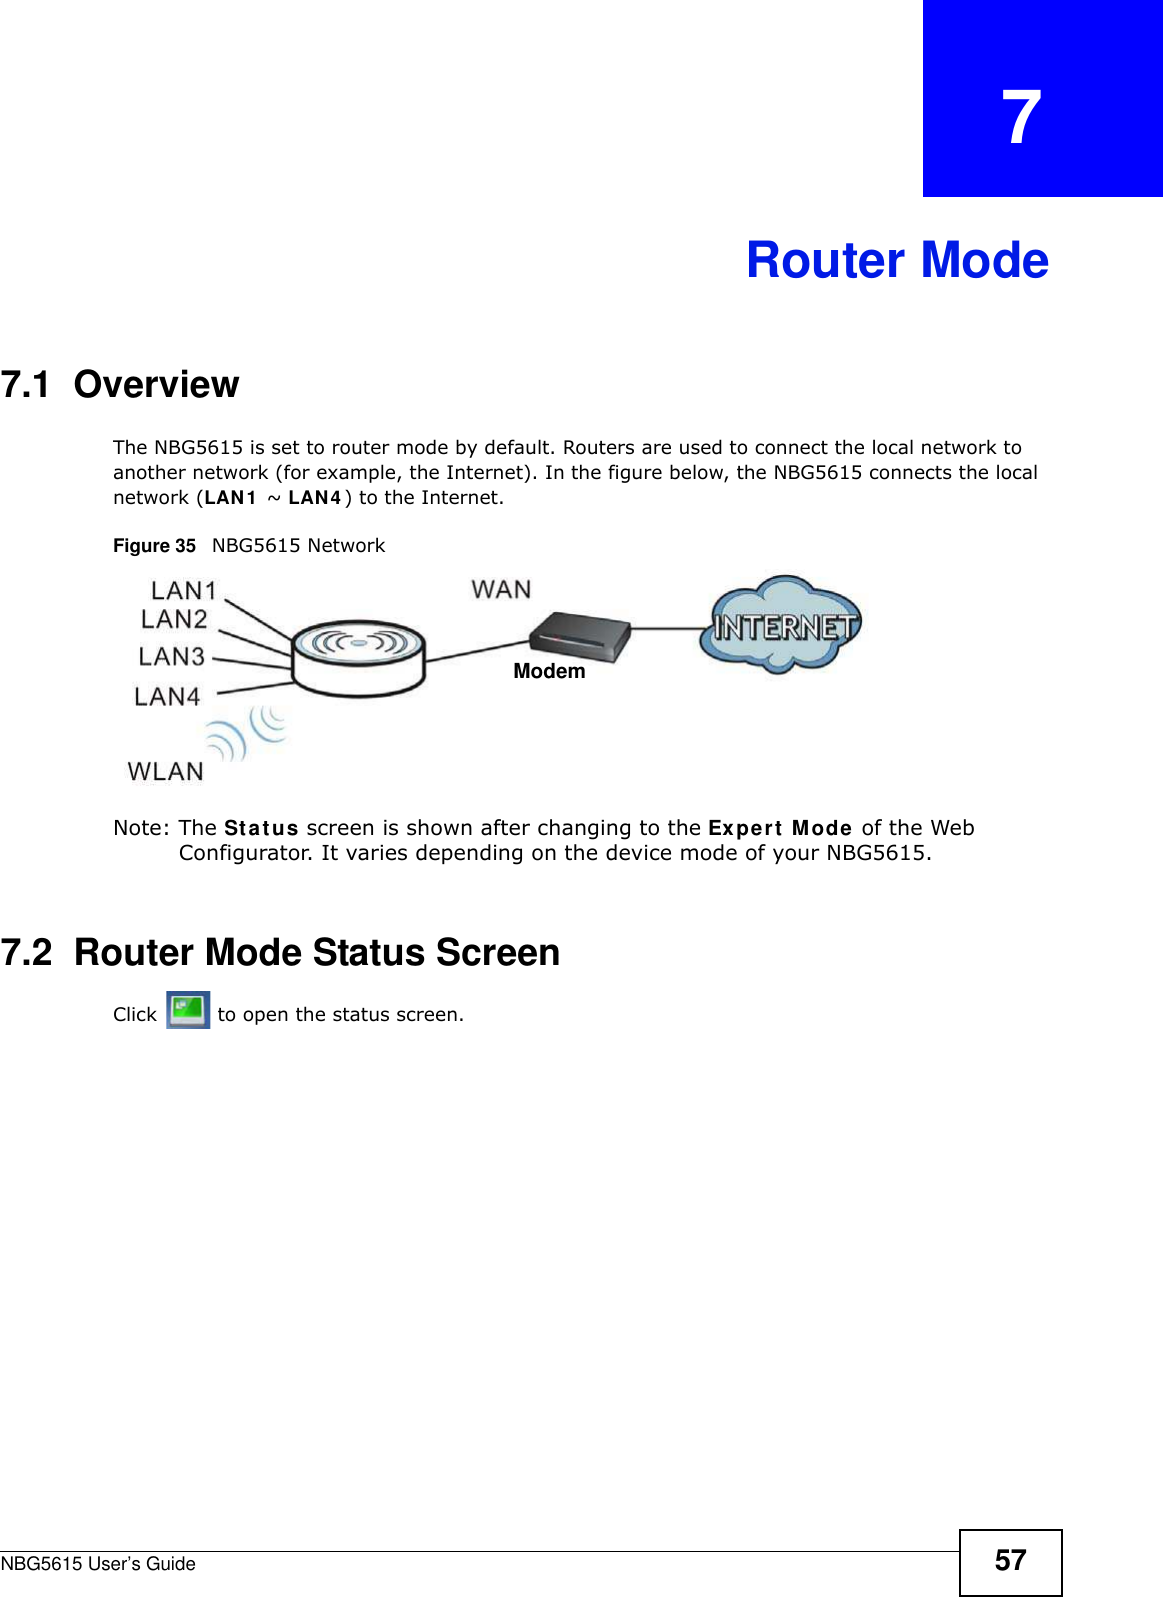 NBG5615 User’s Guide 57CHAPTER   7Router Mode7.1  OverviewThe NBG5615 is set to router mode by default. Routers are used to connect the local network to another network (for example, the Internet). In the figure below, the NBG5615 connects the local network (LAN1  ~ LAN4 ) to the Internet.Figure 35   NBG5615 NetworkNote: The Status screen is shown after changing to the Expert Mode of the Web Configurator. It varies depending on the device mode of your NBG5615.7.2  Router Mode Status ScreenClick   to open the status screen. Modem